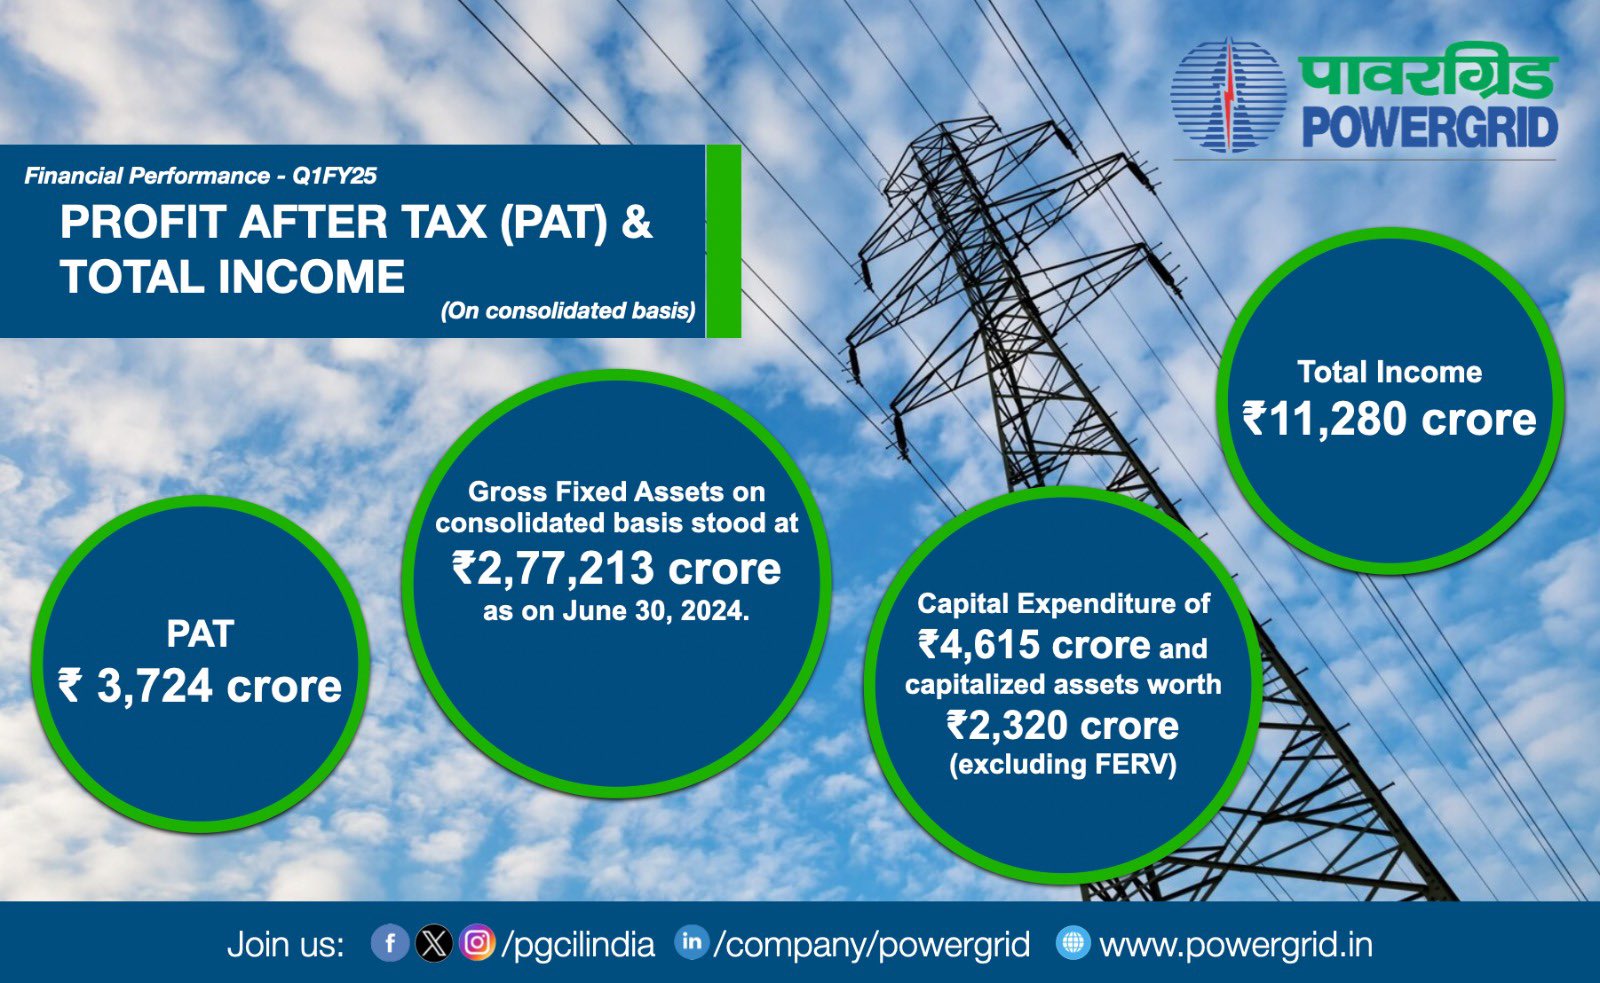 Indian-GRAPEVINE--powergrid-posts-profit-after-tax-pat-of--3724-crore-